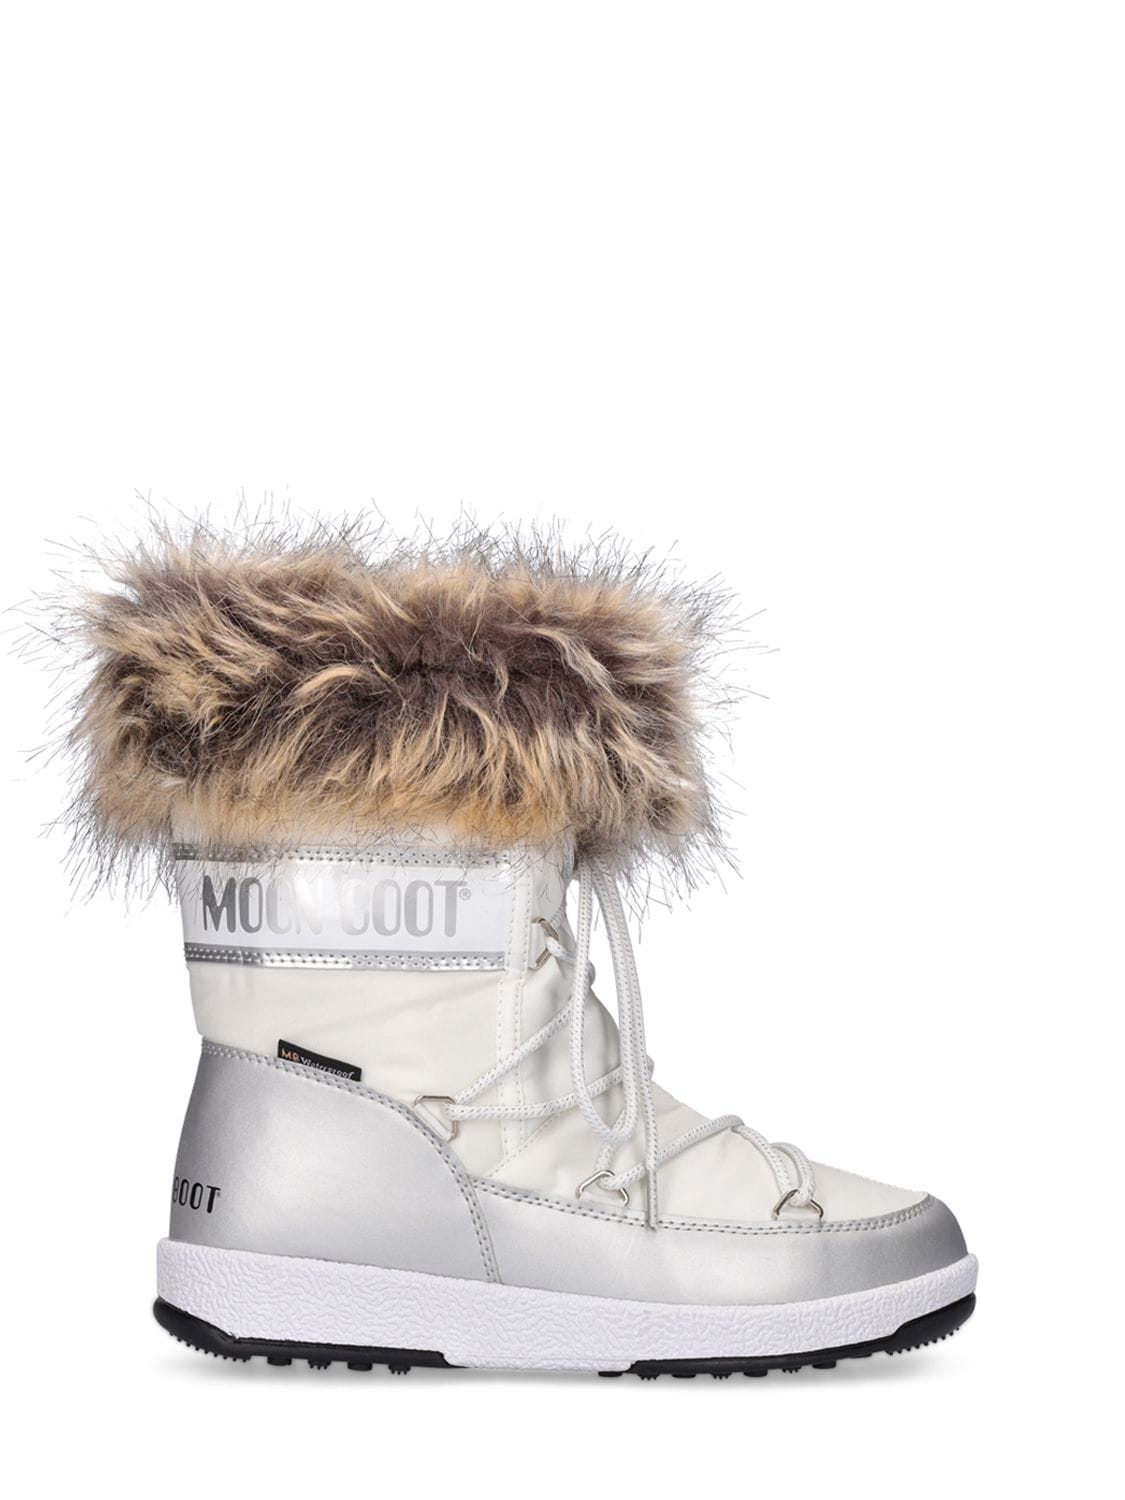 Moon Boot Kids' Nylon Ankle Snow Boots W/ Faux Fur In White,silver